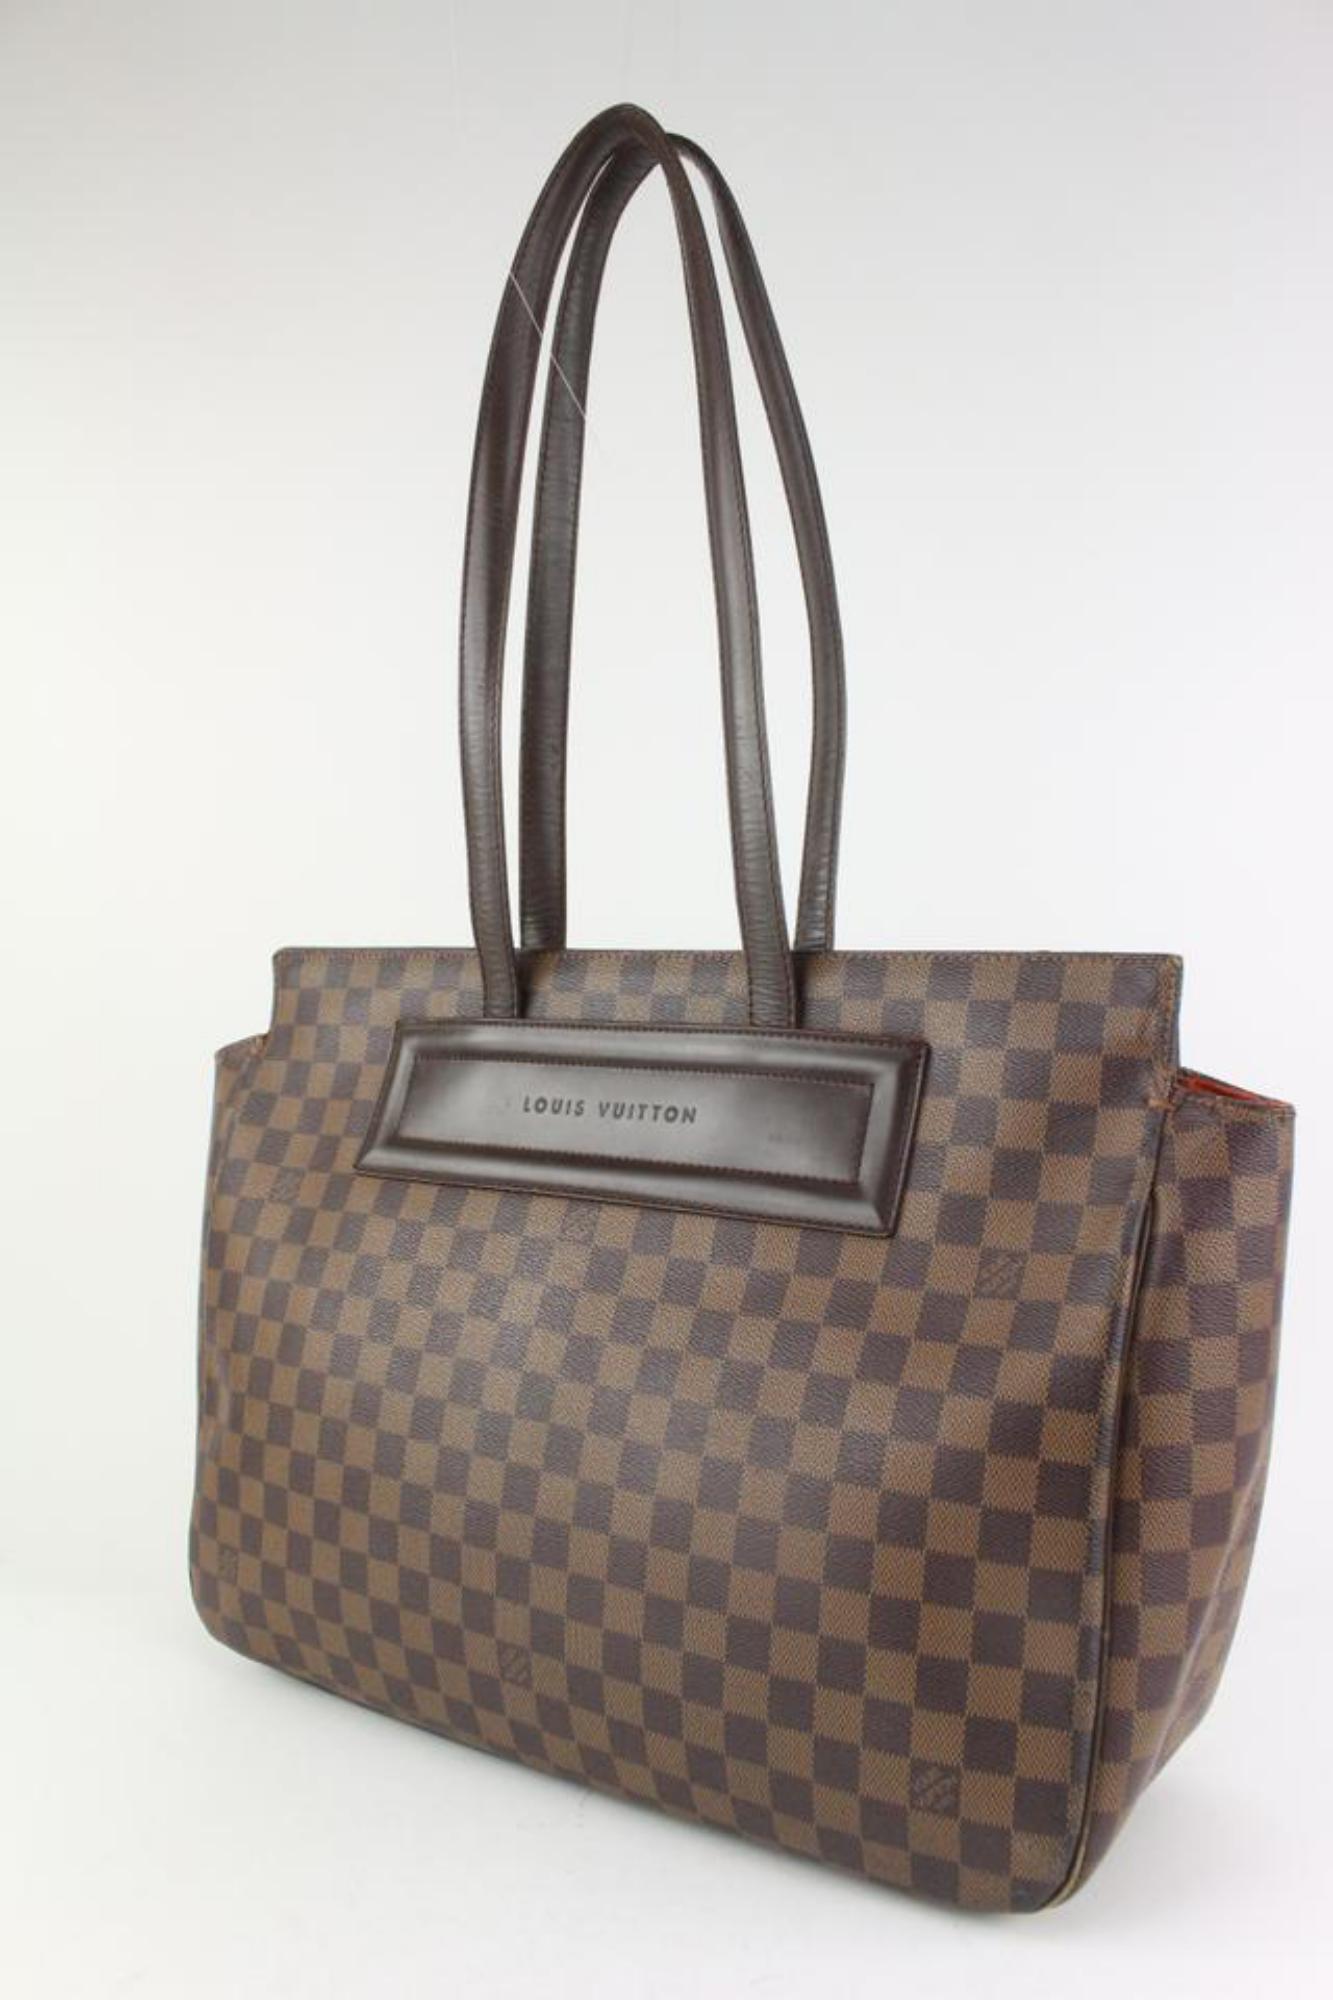 Louis Vuitton Discontinued Damier Ebene Parioli Tote bag 1119lv53
Date Code/Serial Number: AR0979
Made In: France
Measurements: Length:  16.5